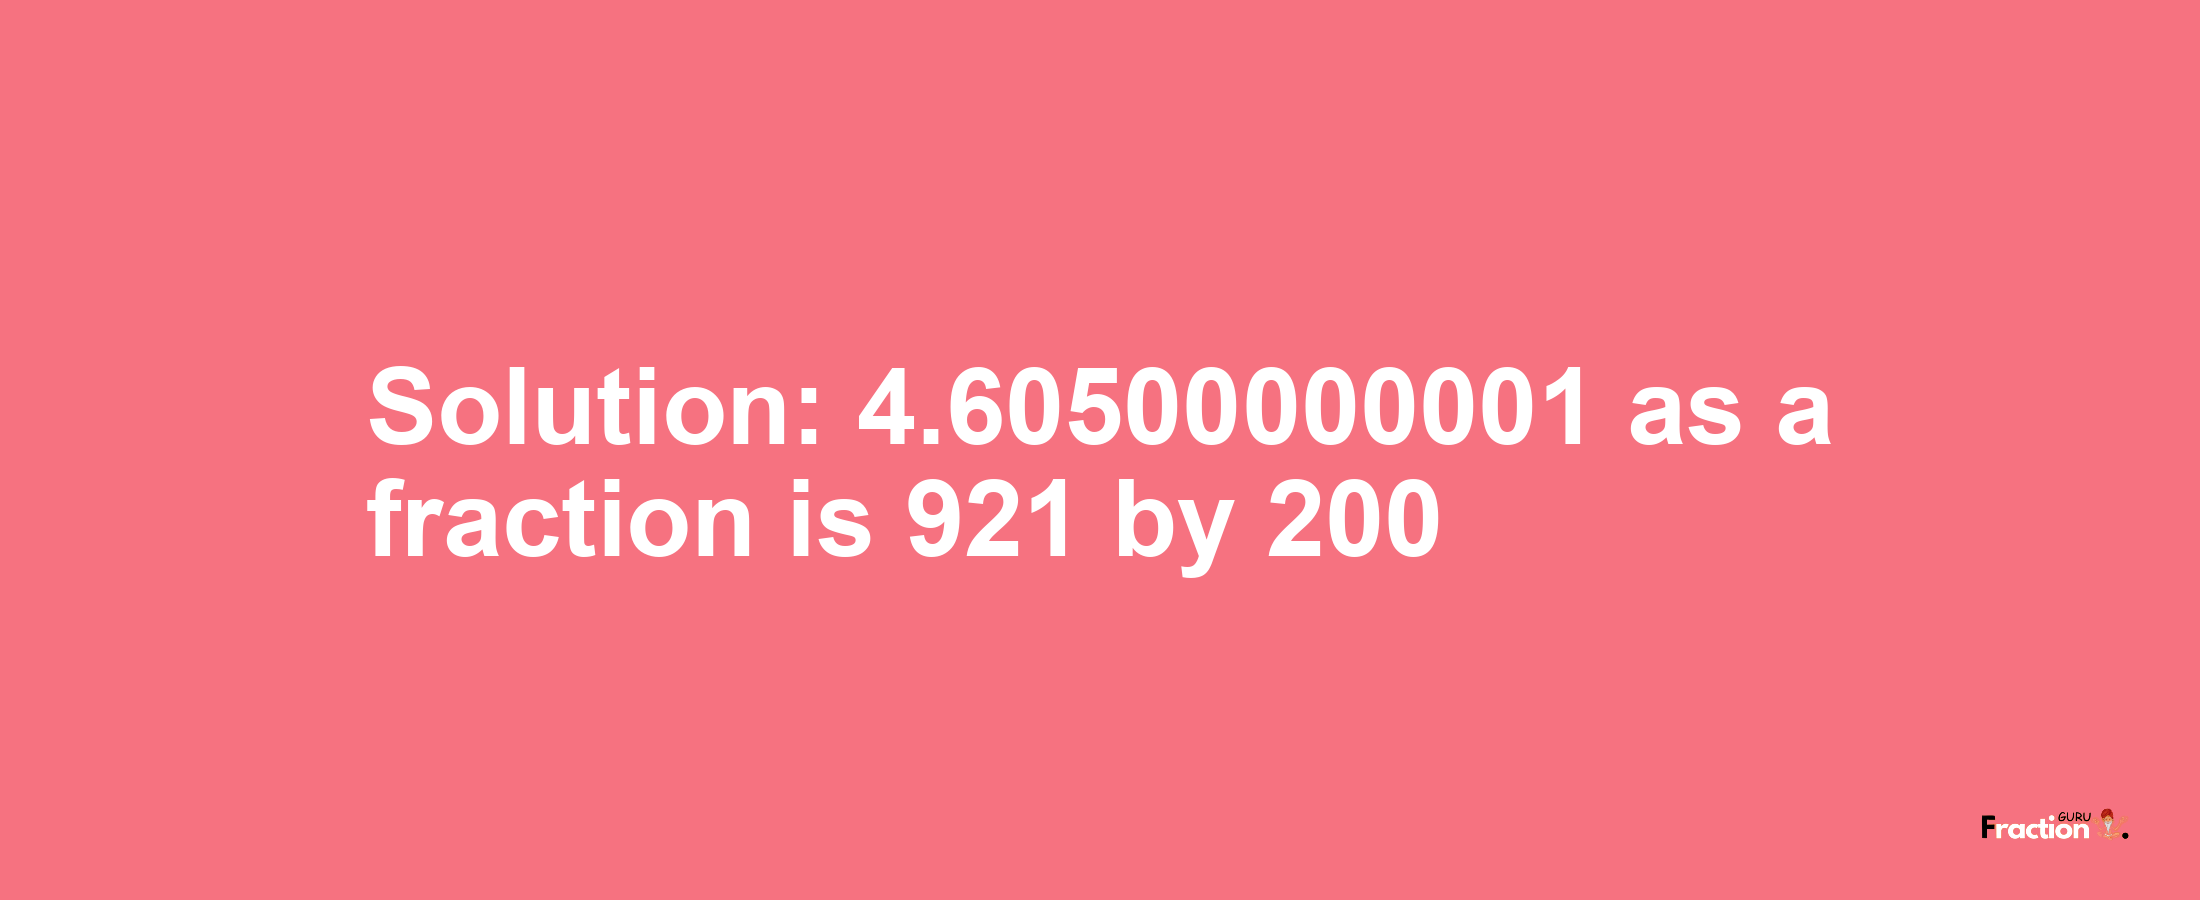 Solution:4.60500000001 as a fraction is 921/200